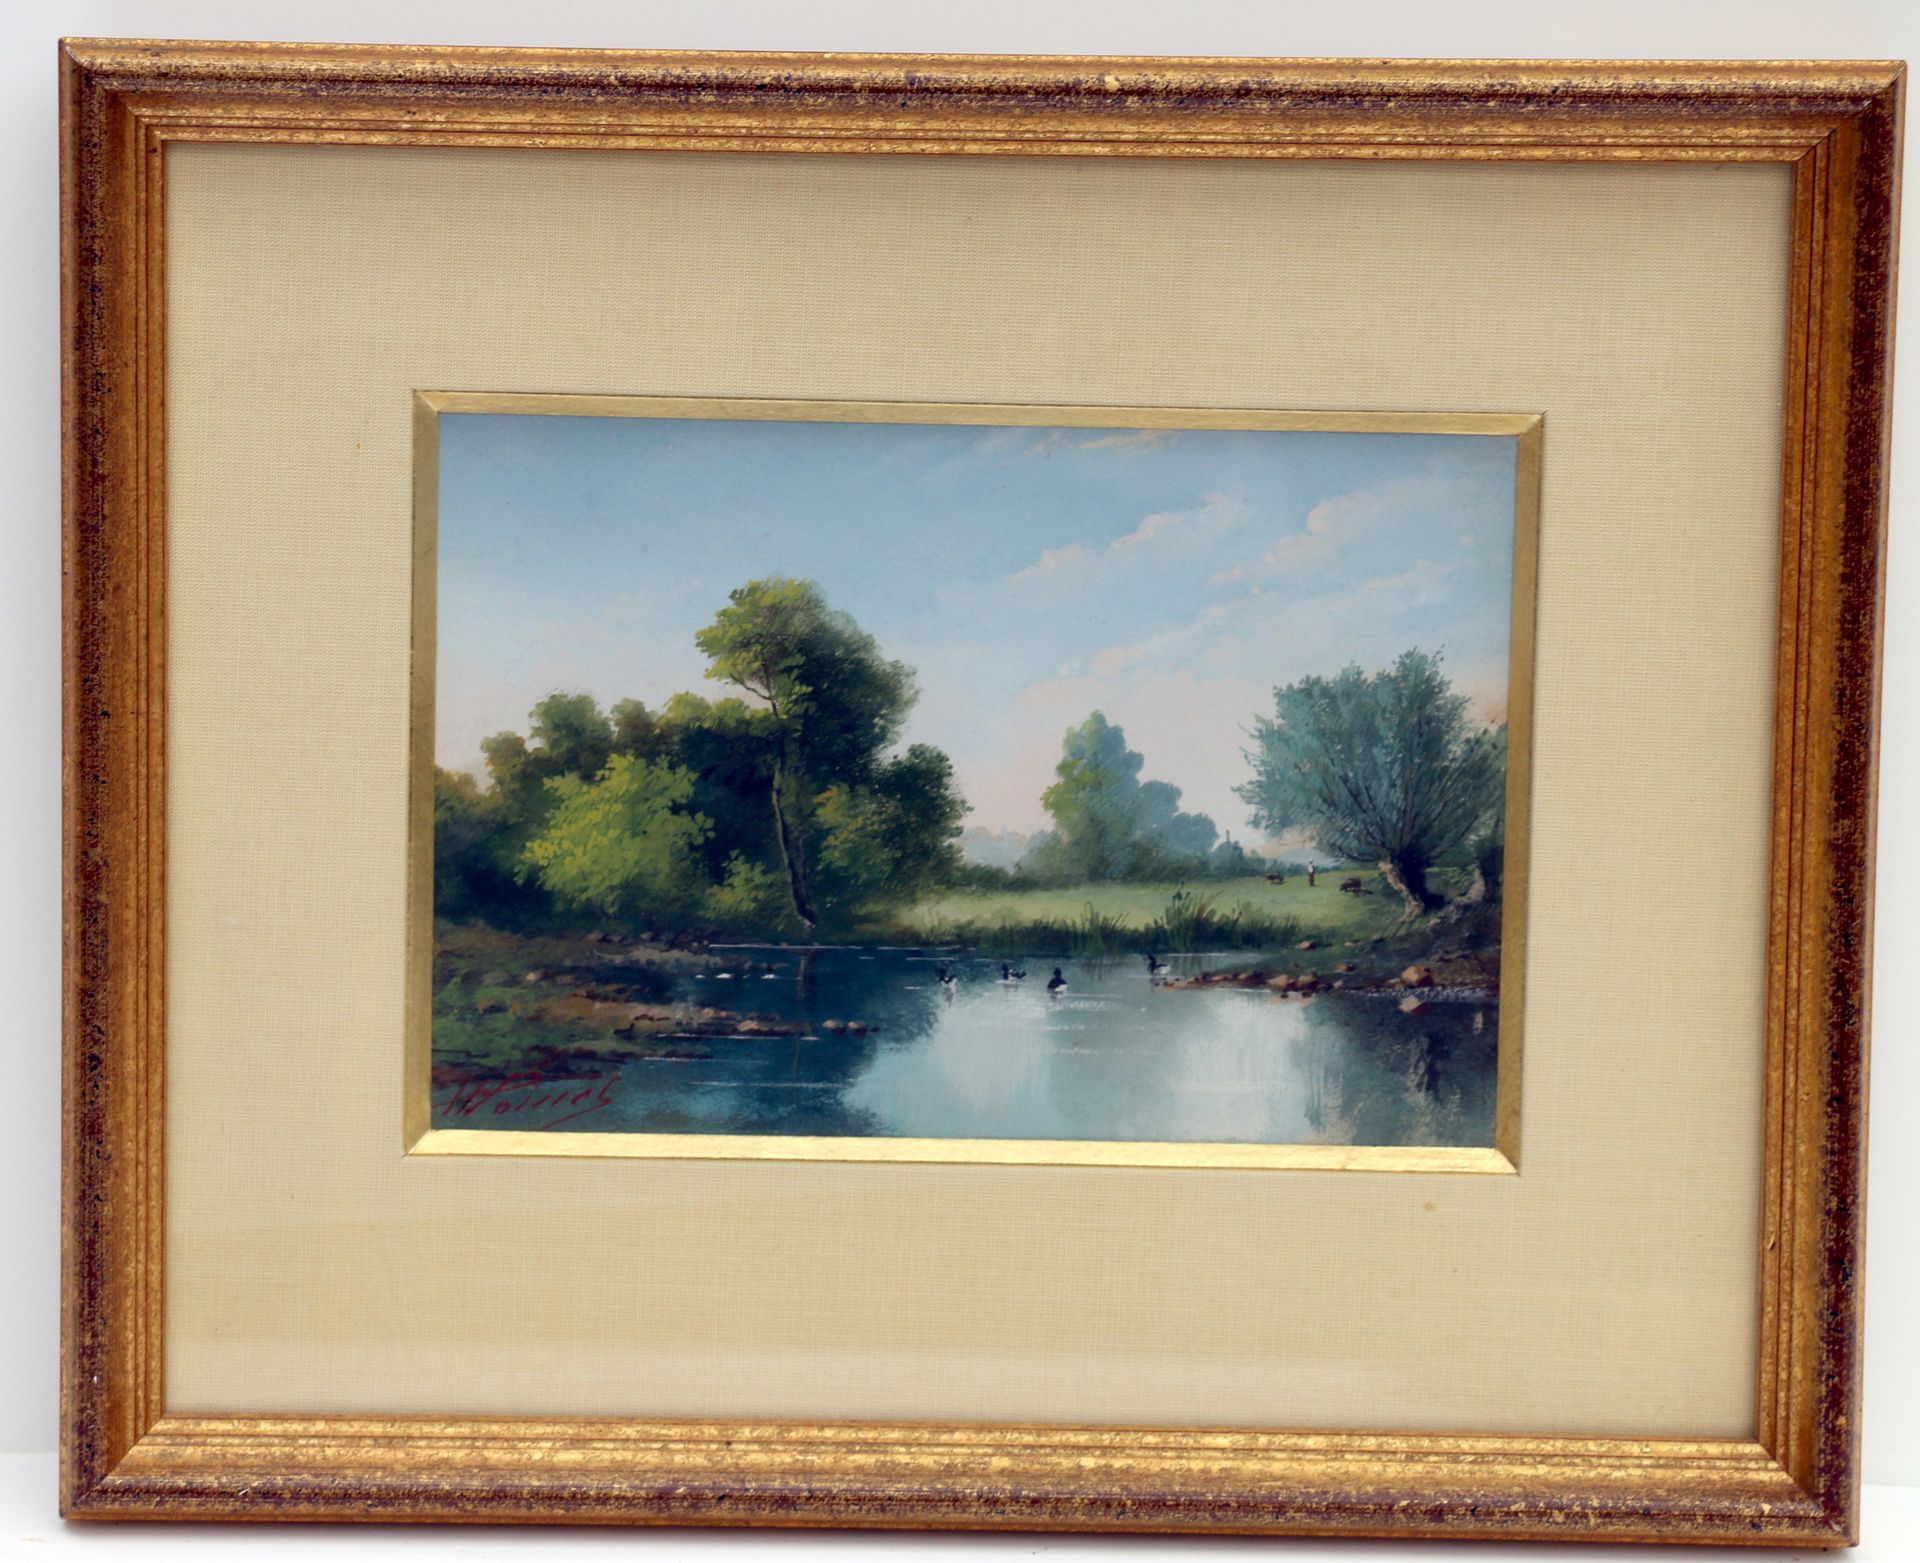 Null "View of the duck pond" Watercolour and gouache, sbg. H 14 x 20 cm